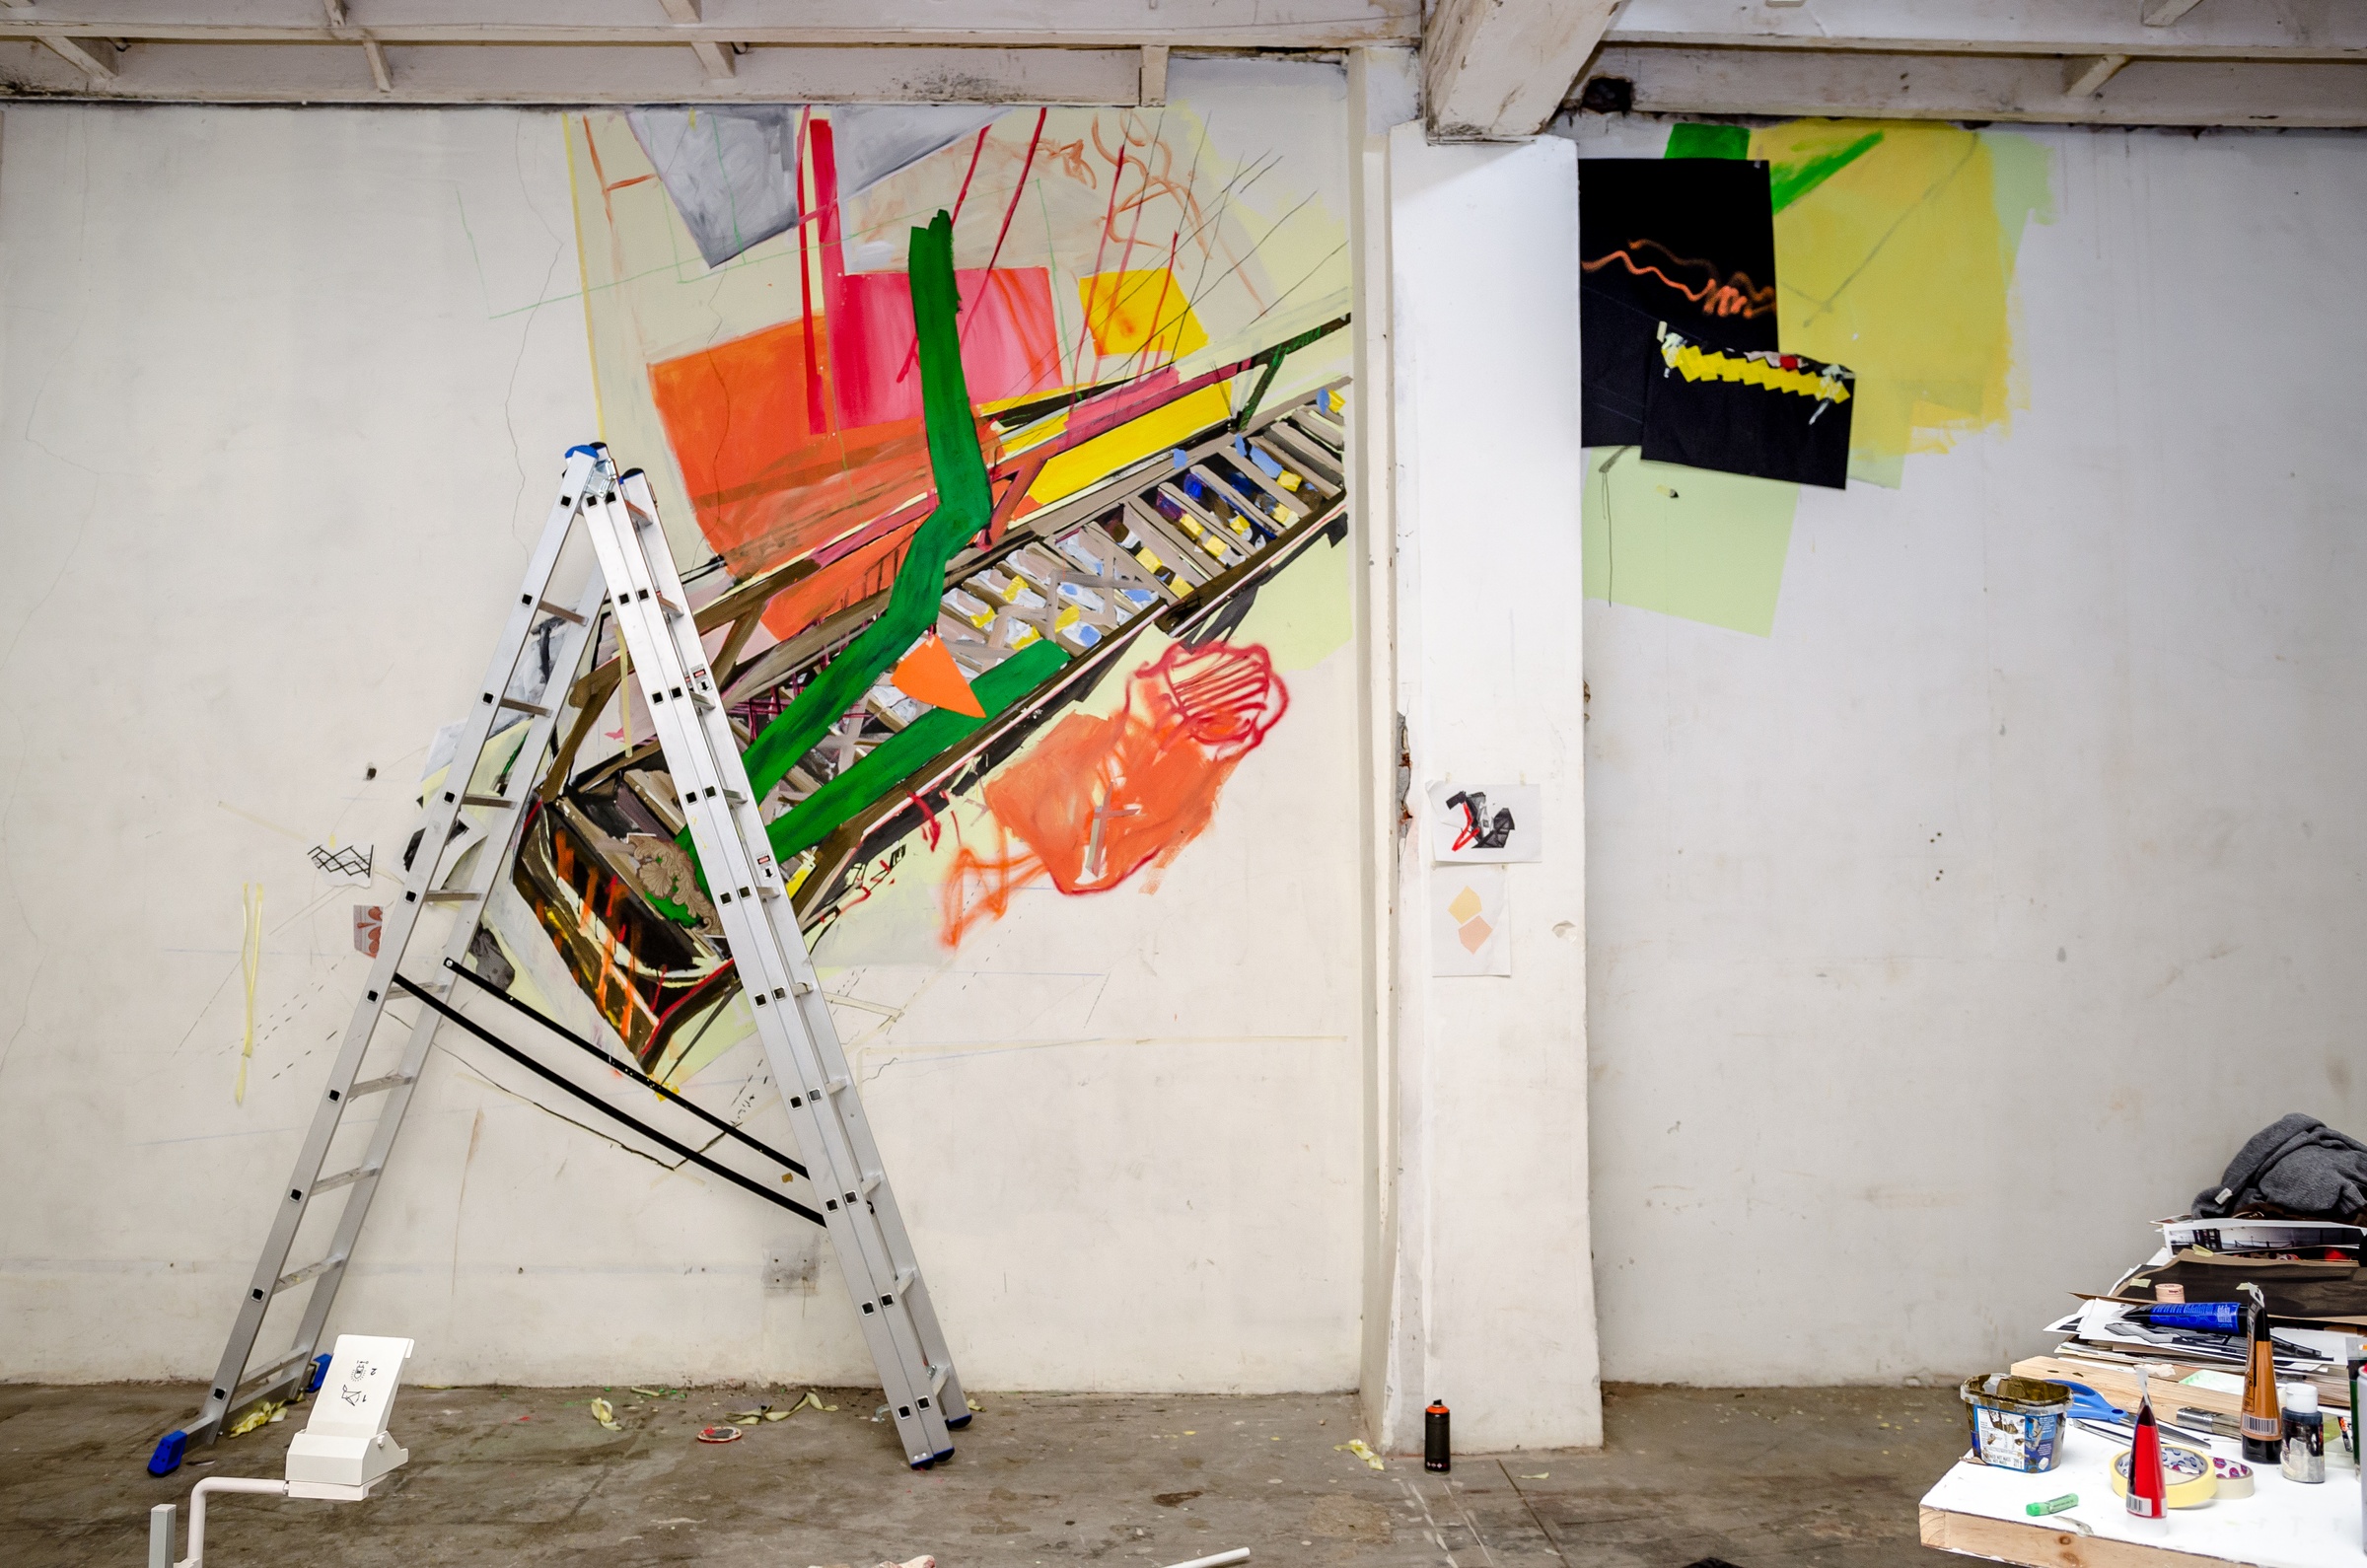 Process photograph from Dorothee Kreutzfeldt’s residency on A4’s 1st floor. At the back, the wall features a painted mural along the top. At the front, a folding ladder stands in front of the wall.
